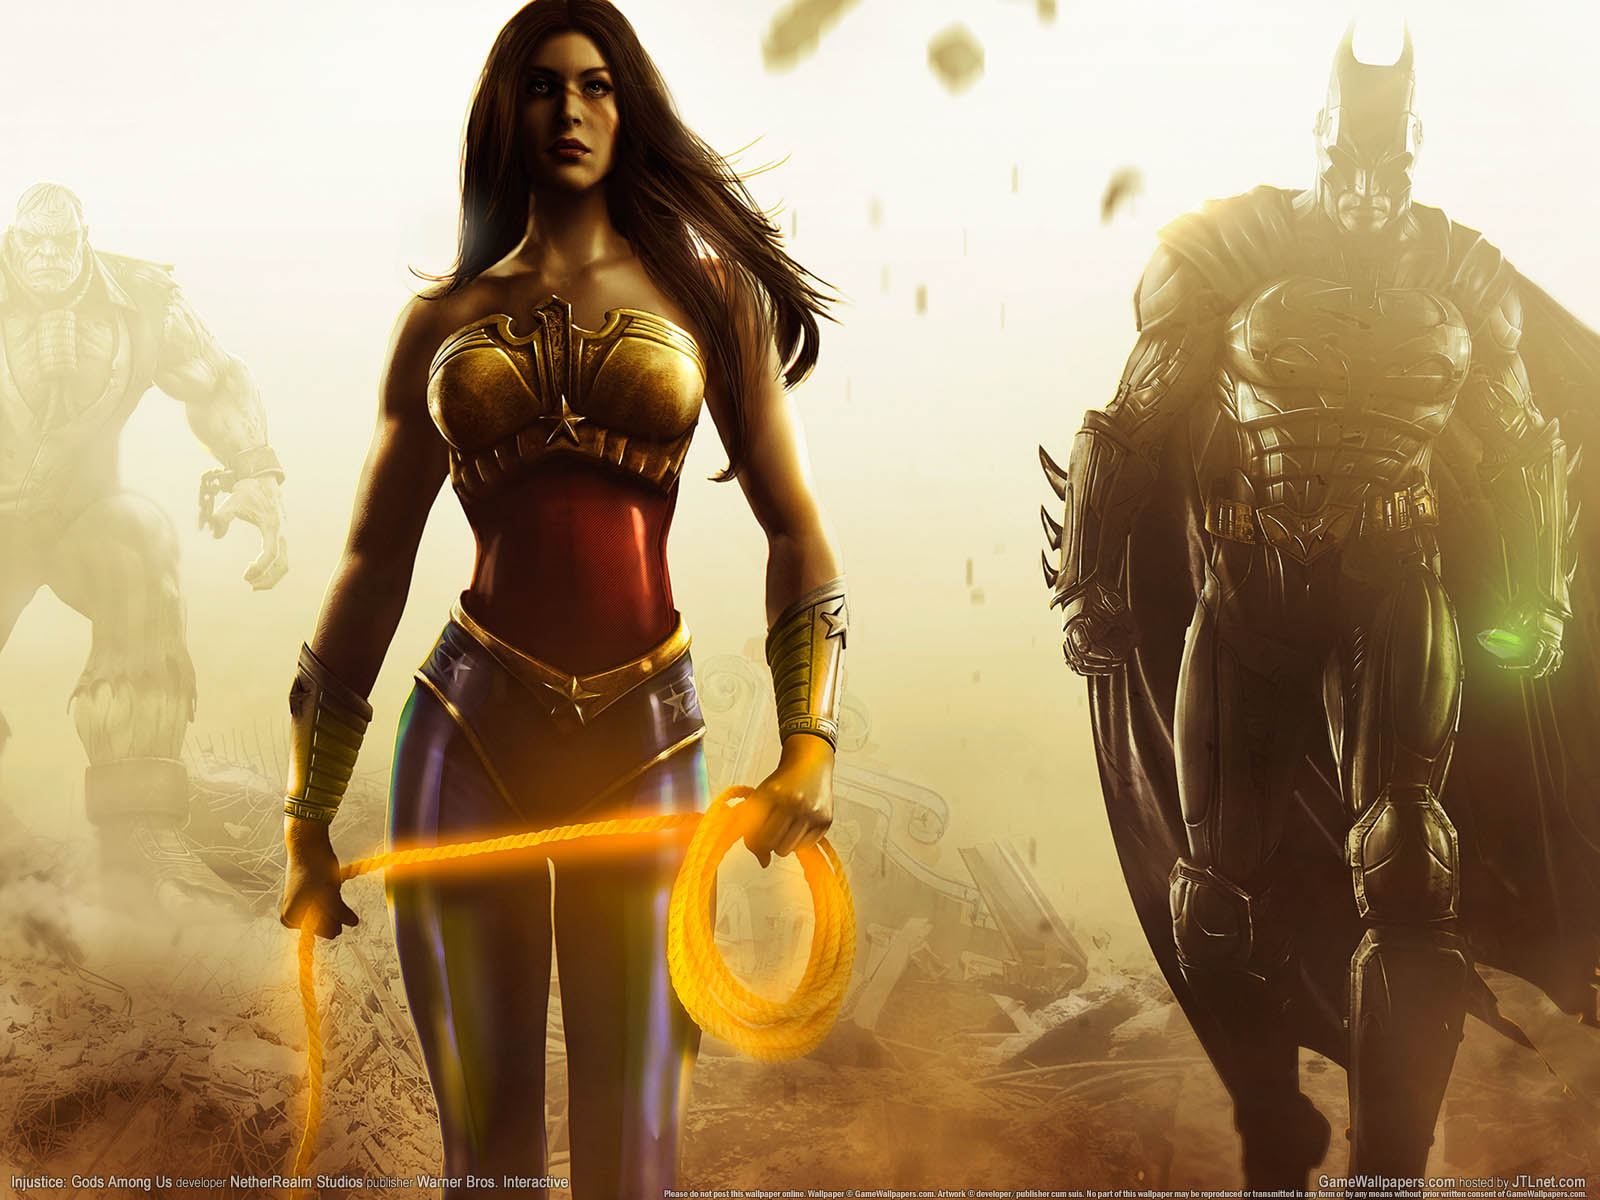 Injustice%3A Gods Among Us achtergrond 05 1600x1200